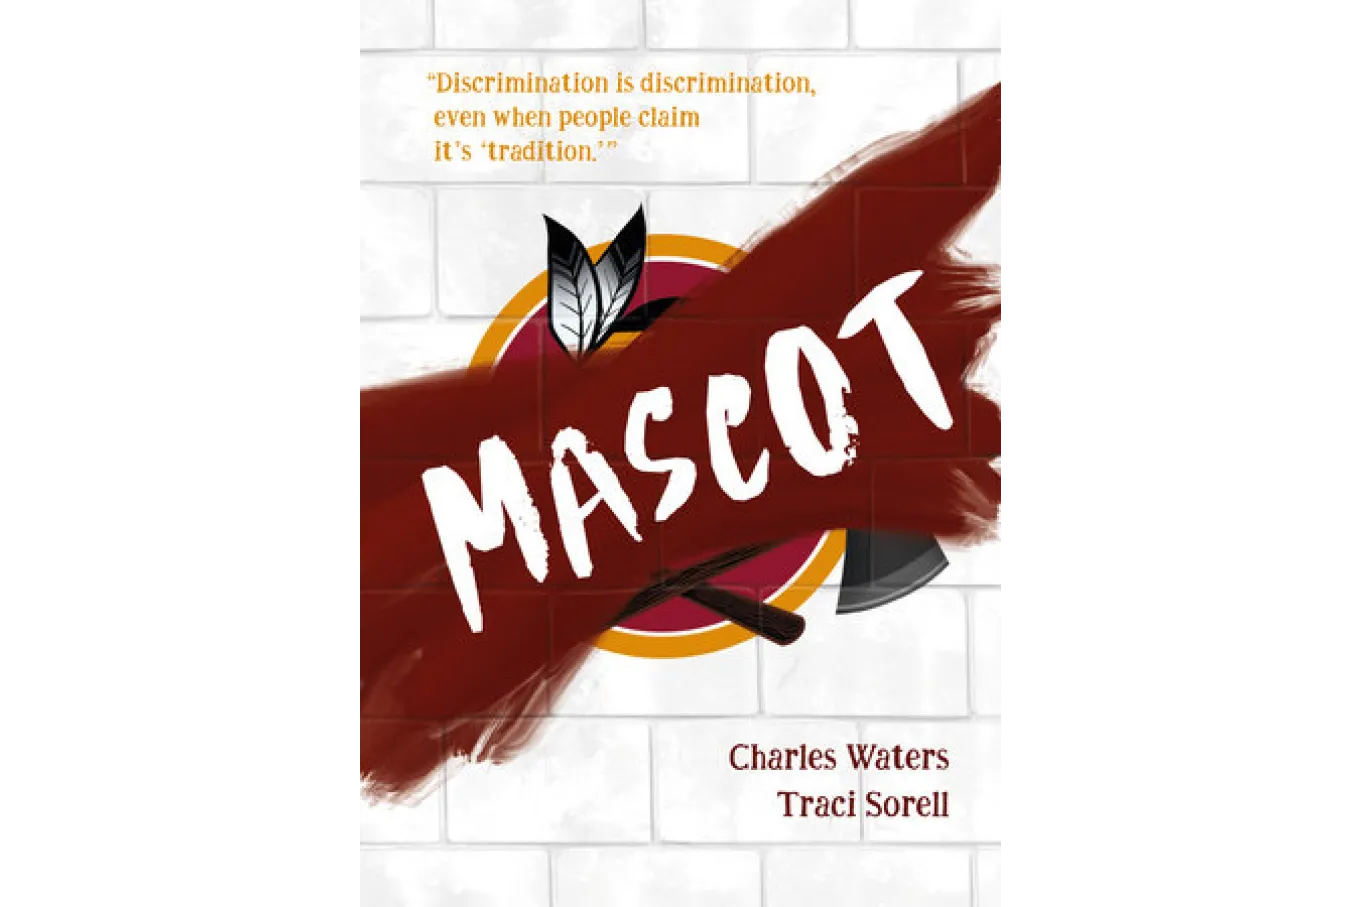 Cover of Mascot